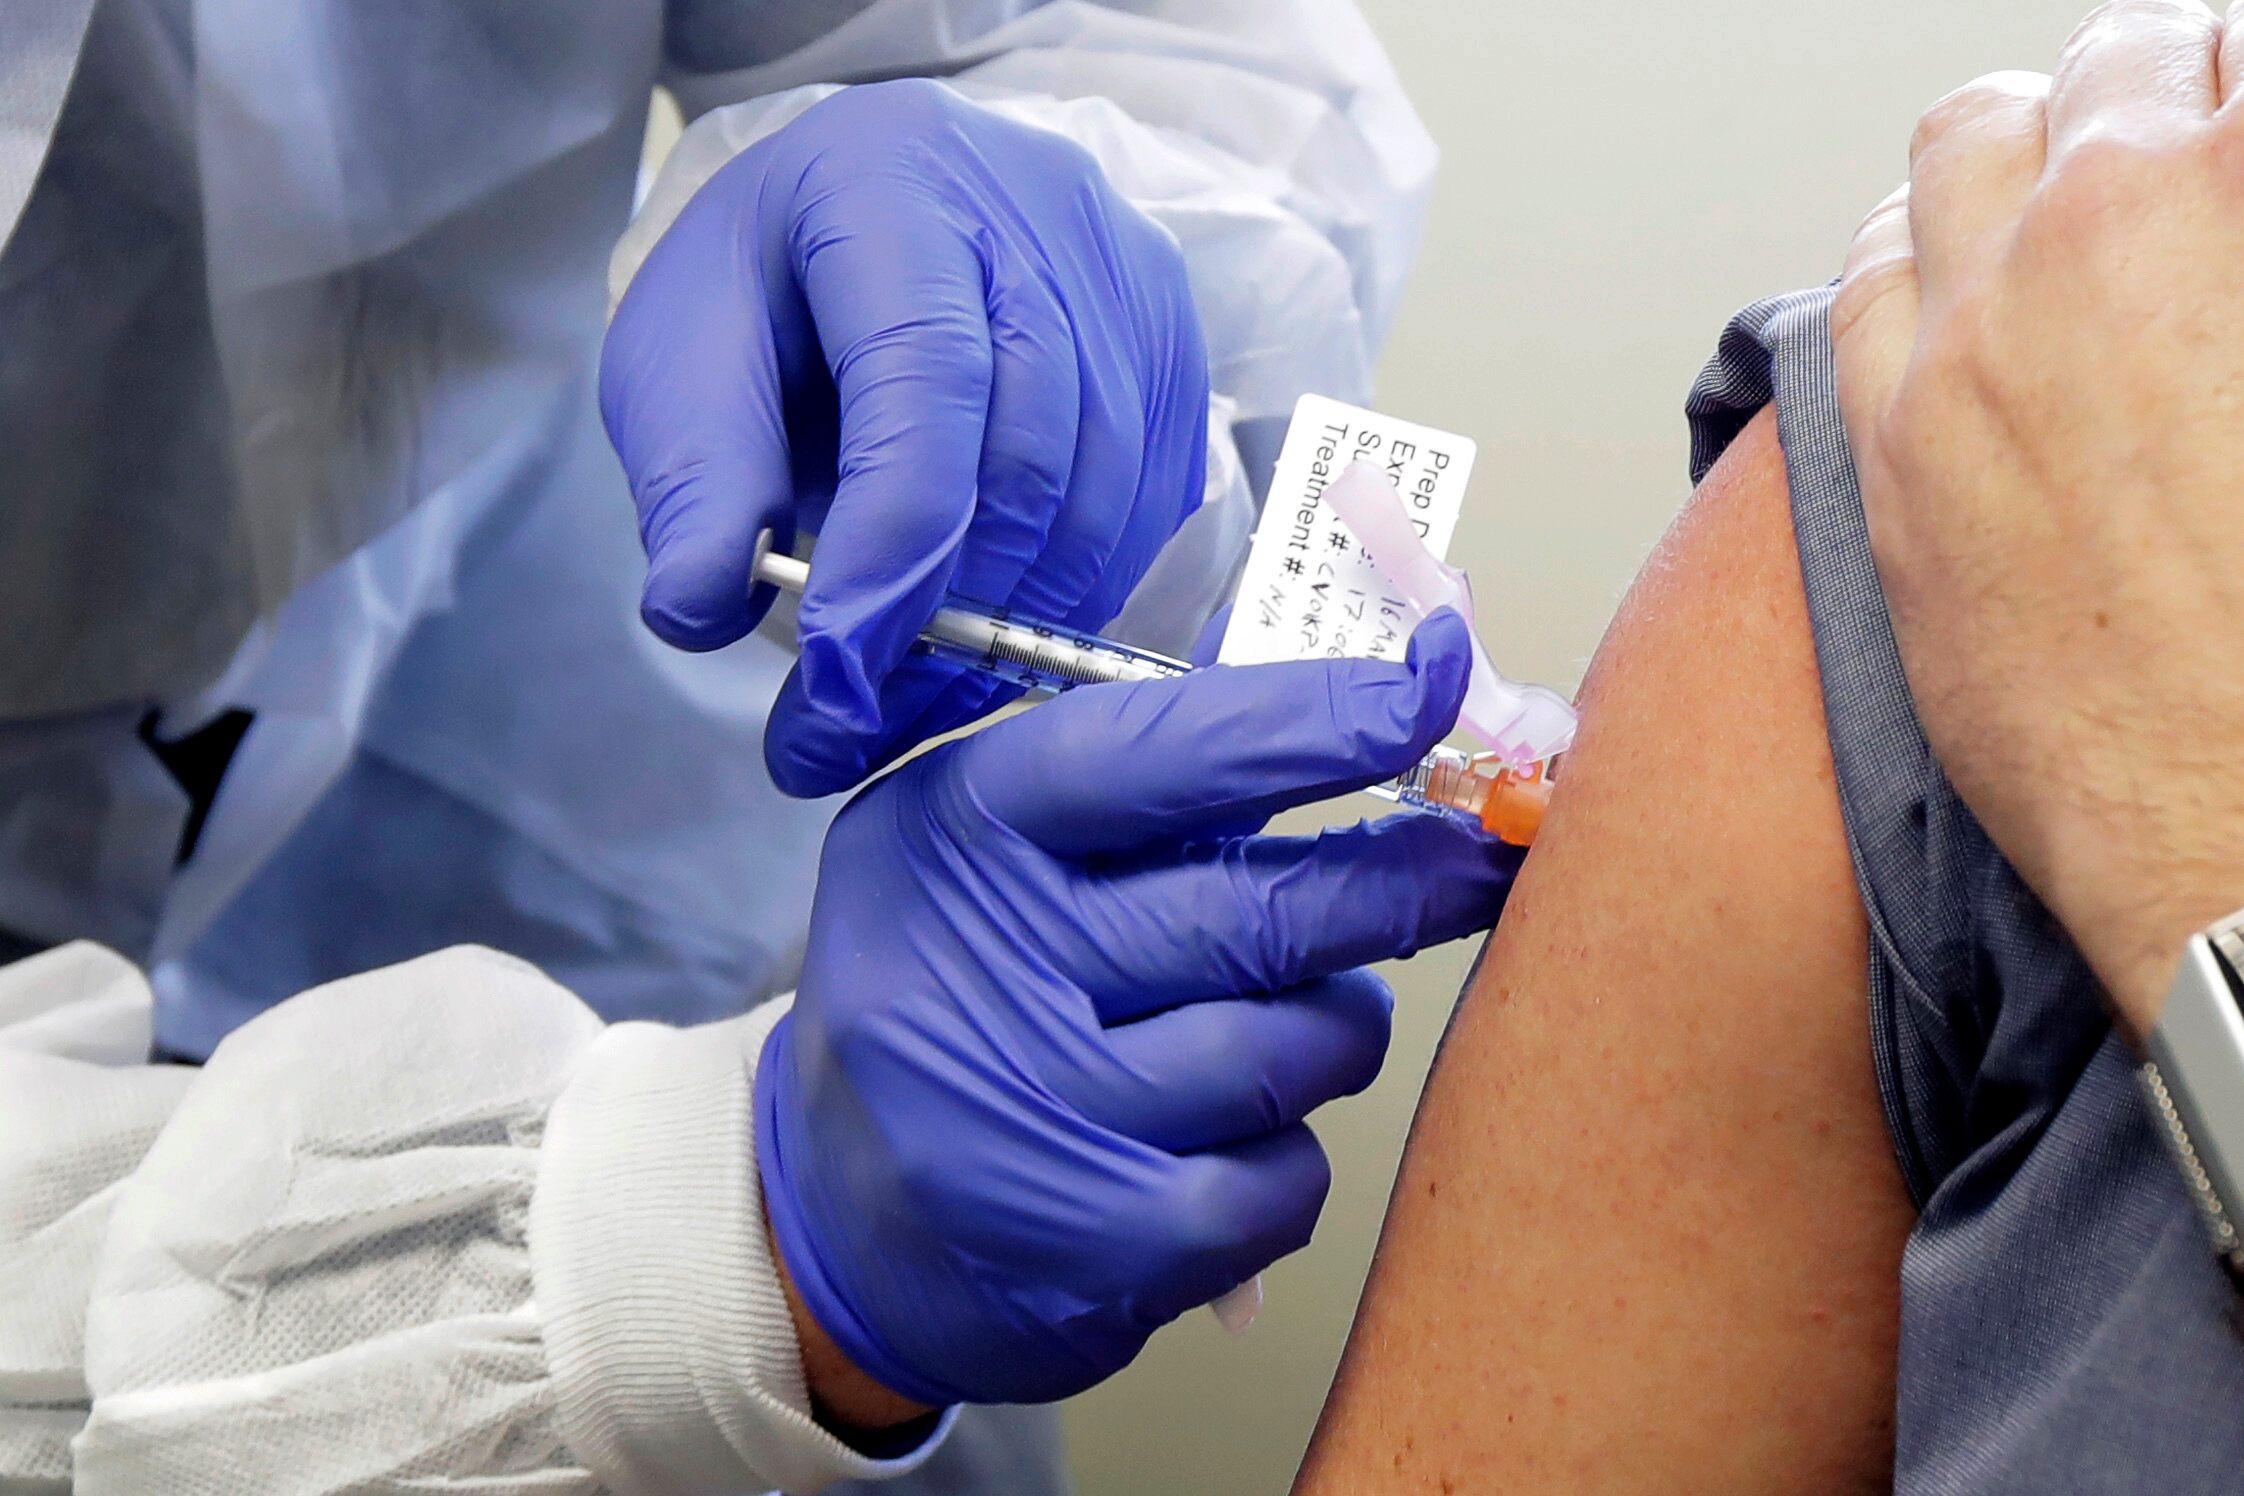 Russia's elite given experimental coronavirus vaccine for months: report